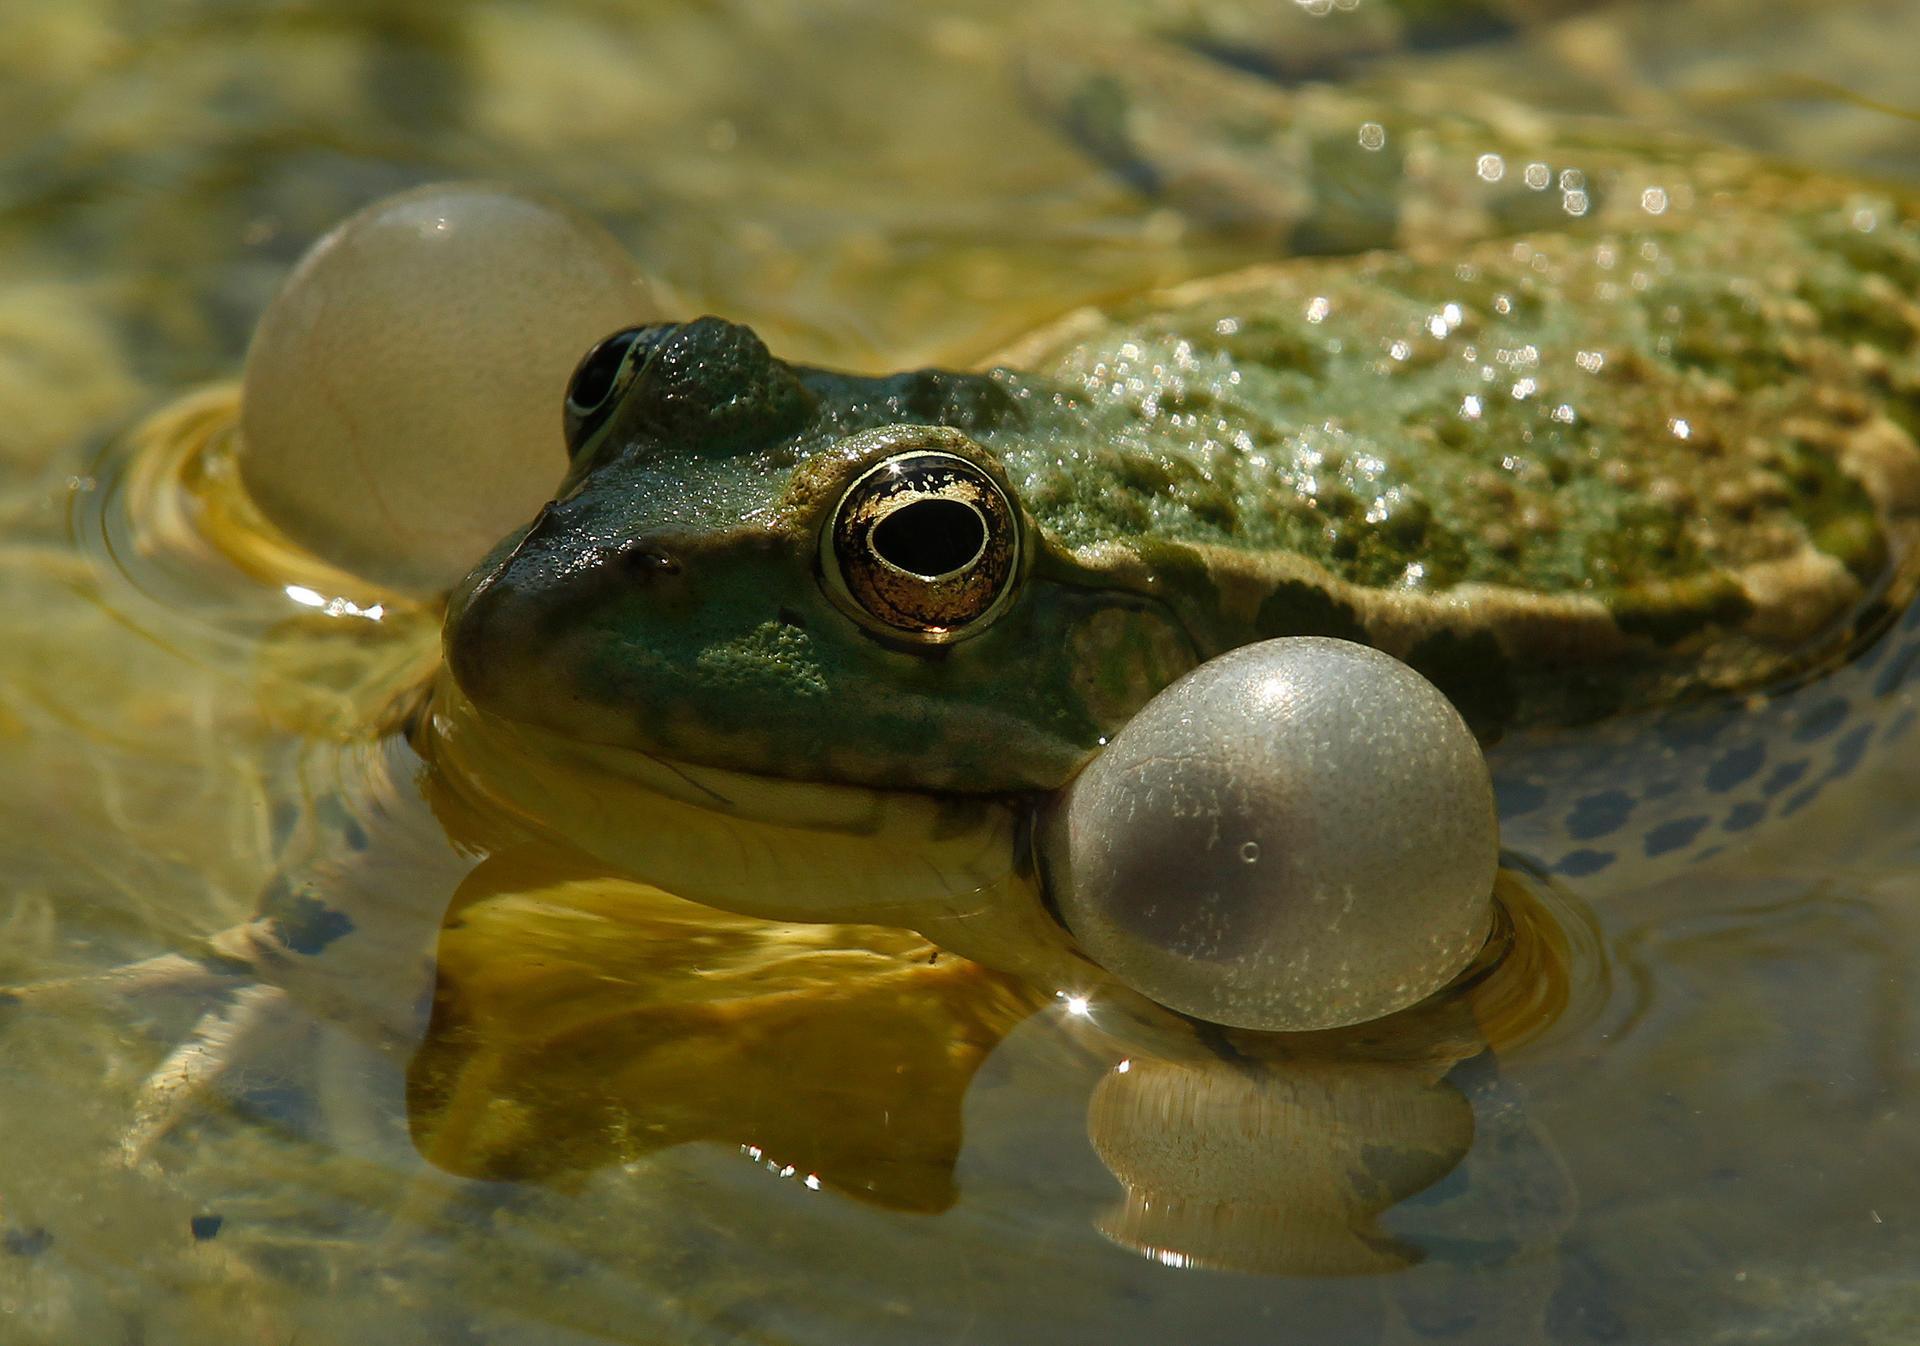 A frog attempts to mate with female frogs in a pond in Tourrettes, southern France, May 27, 2012.